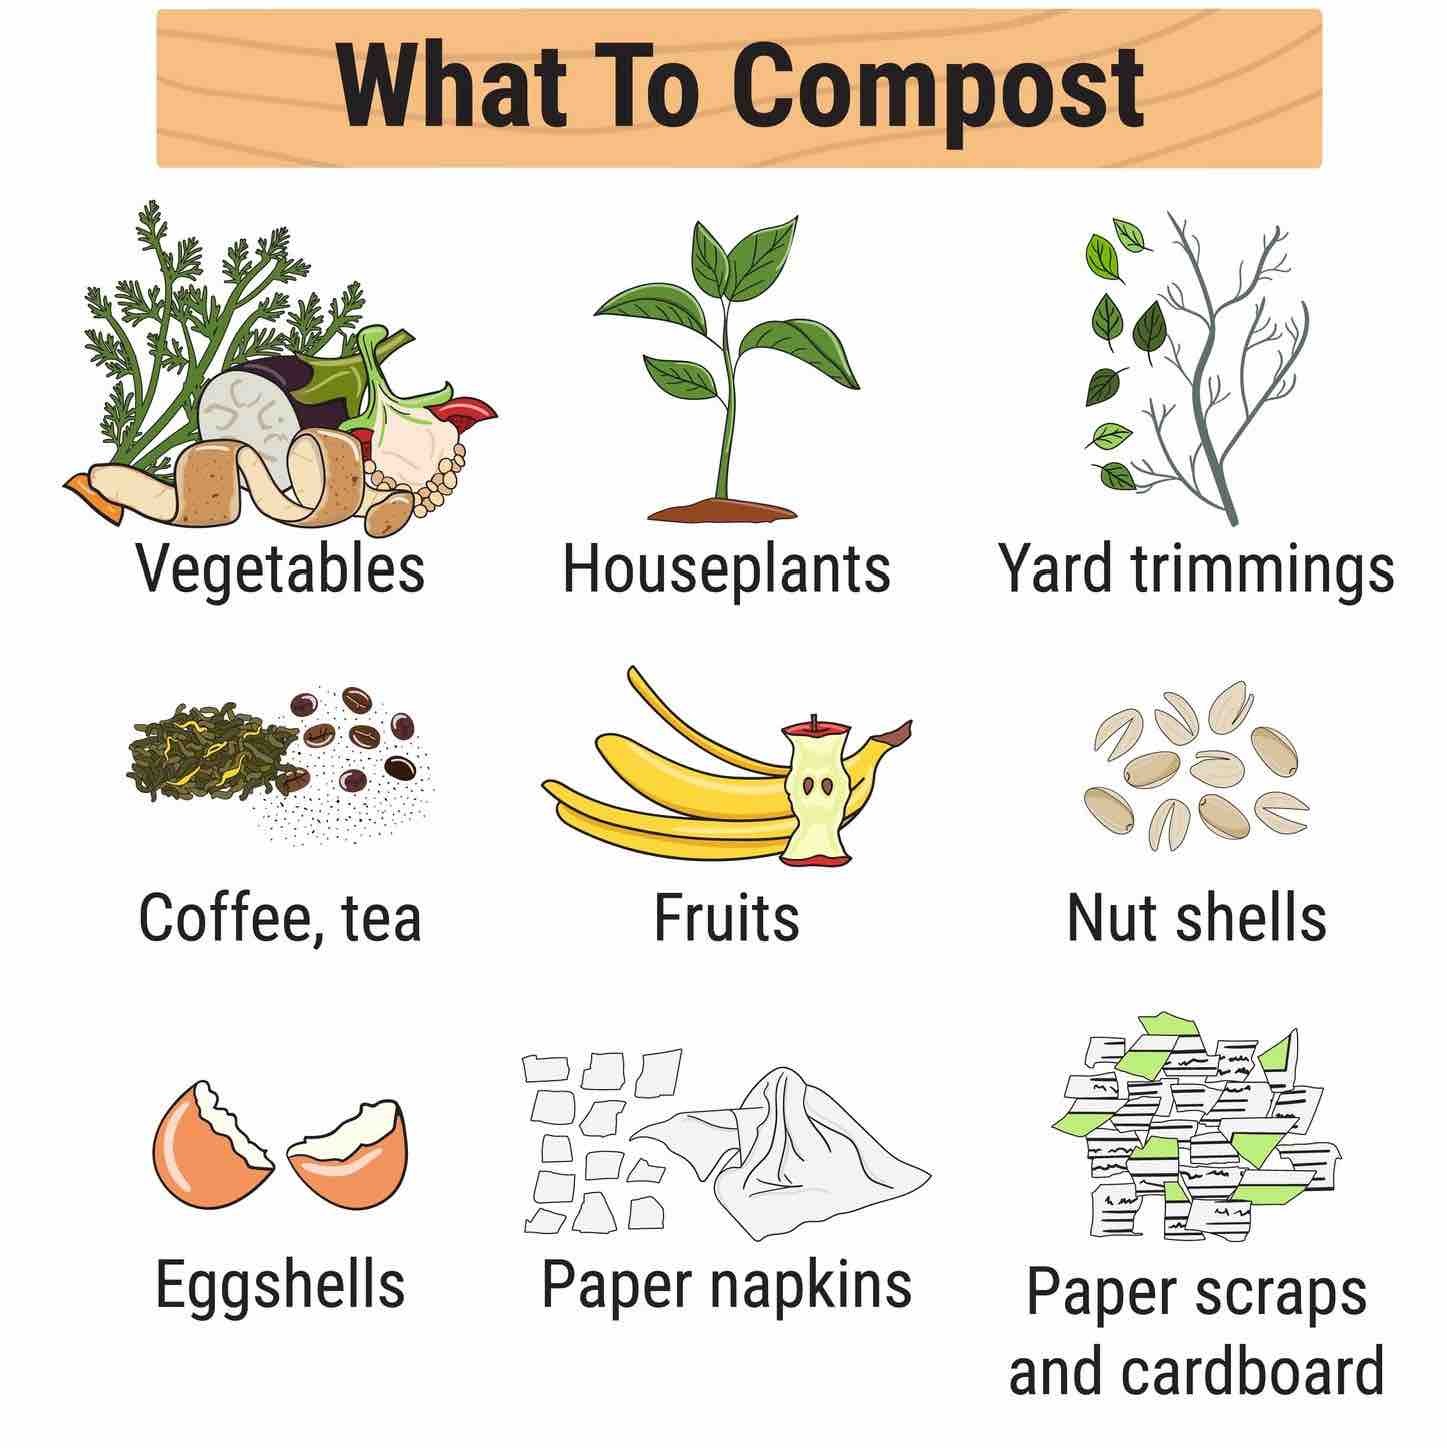 What to compost? Everything that once came from the Earth can be returned to the soil. Including fruits and vegetables, houseplants, yard trimmings, coffee, tea, nut shells, eggshells, paper napkins, paper scraps and cardboard